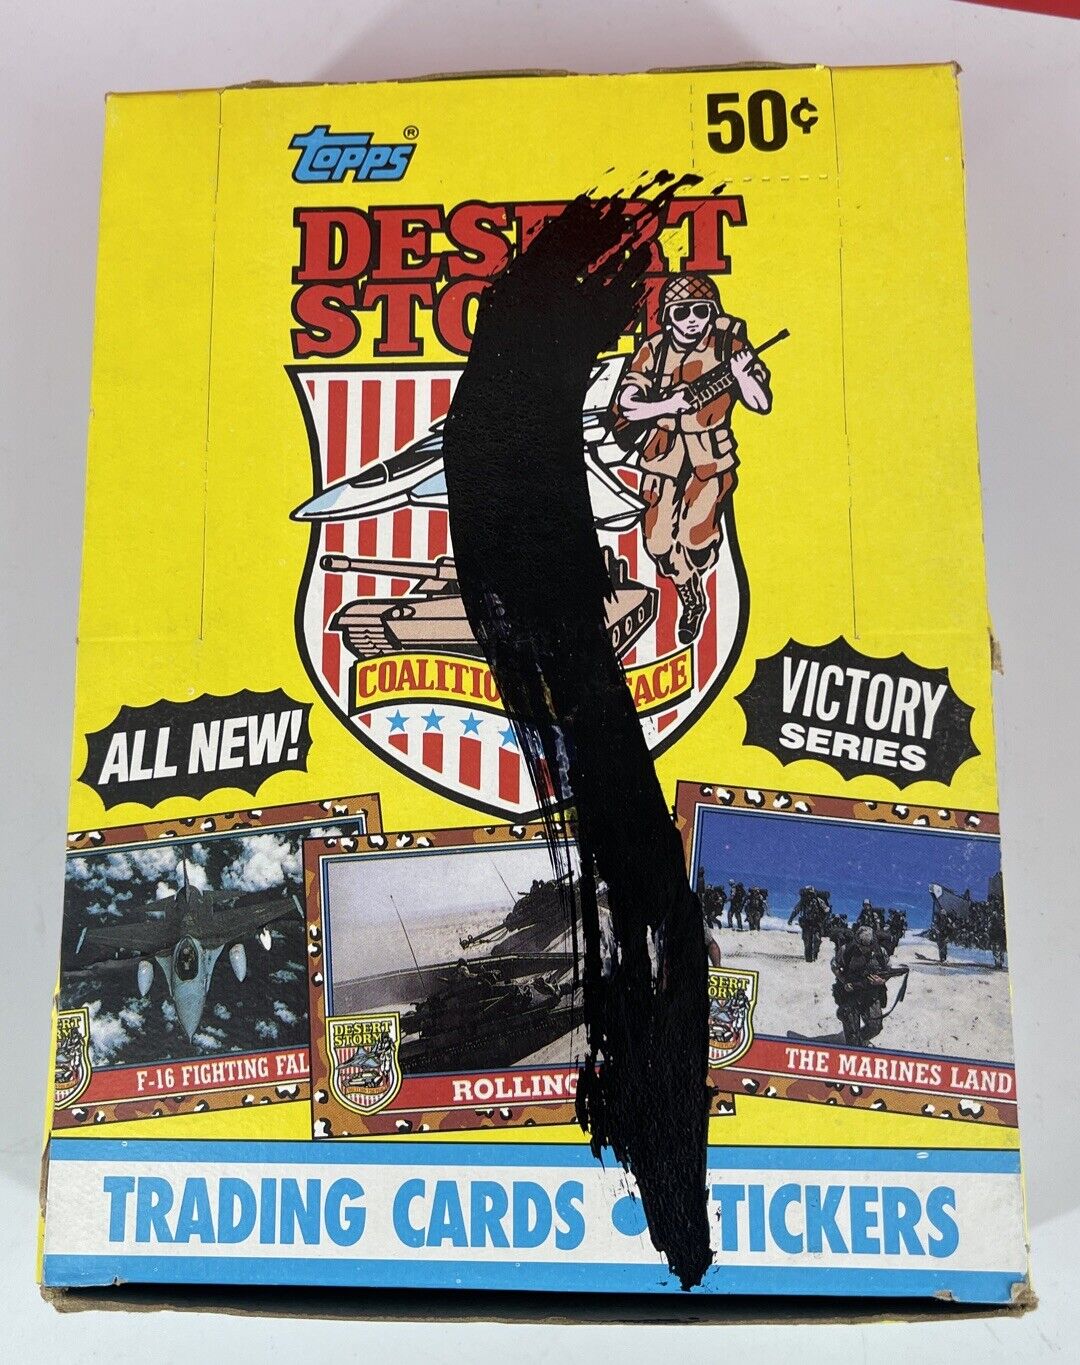 1991 Topps Desert Storm Trading Card 36ct Full Box Unopened Cards Victory Series